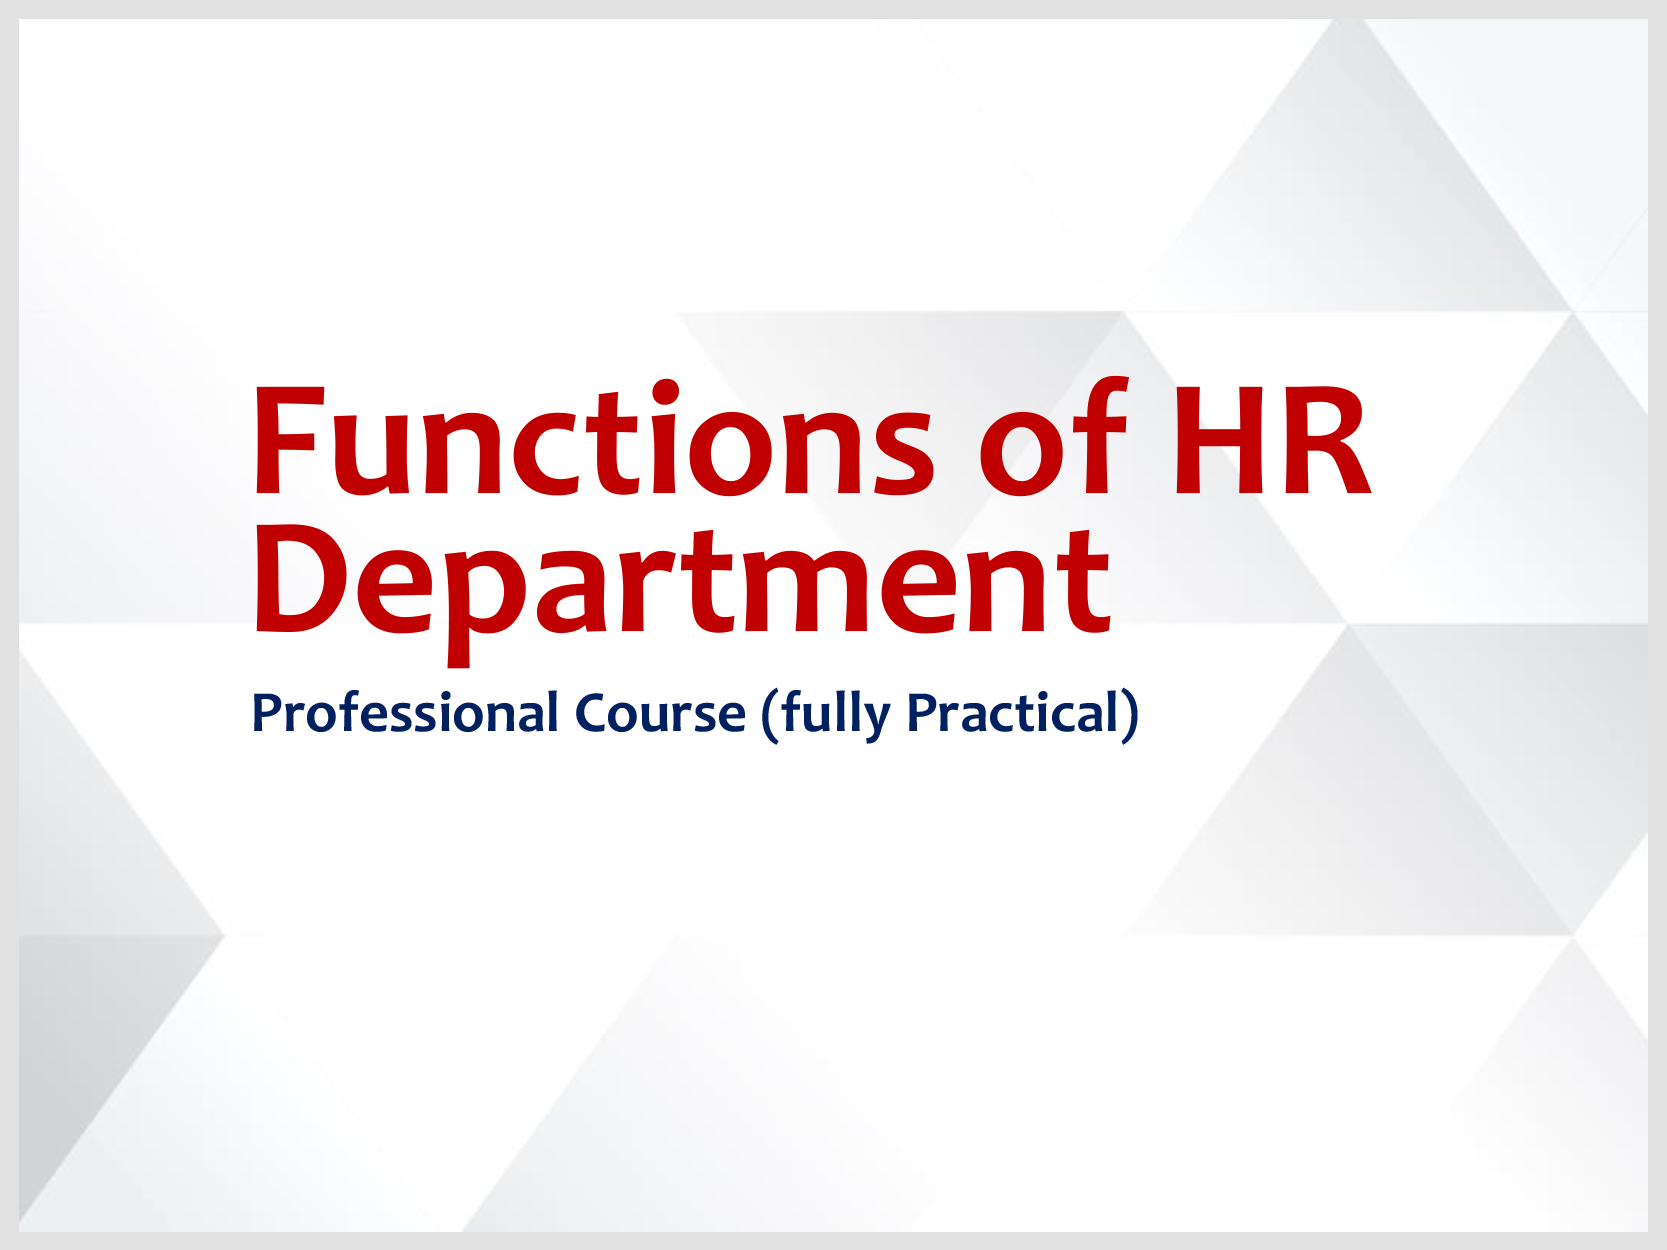 Professional Course in Functions of HR Department